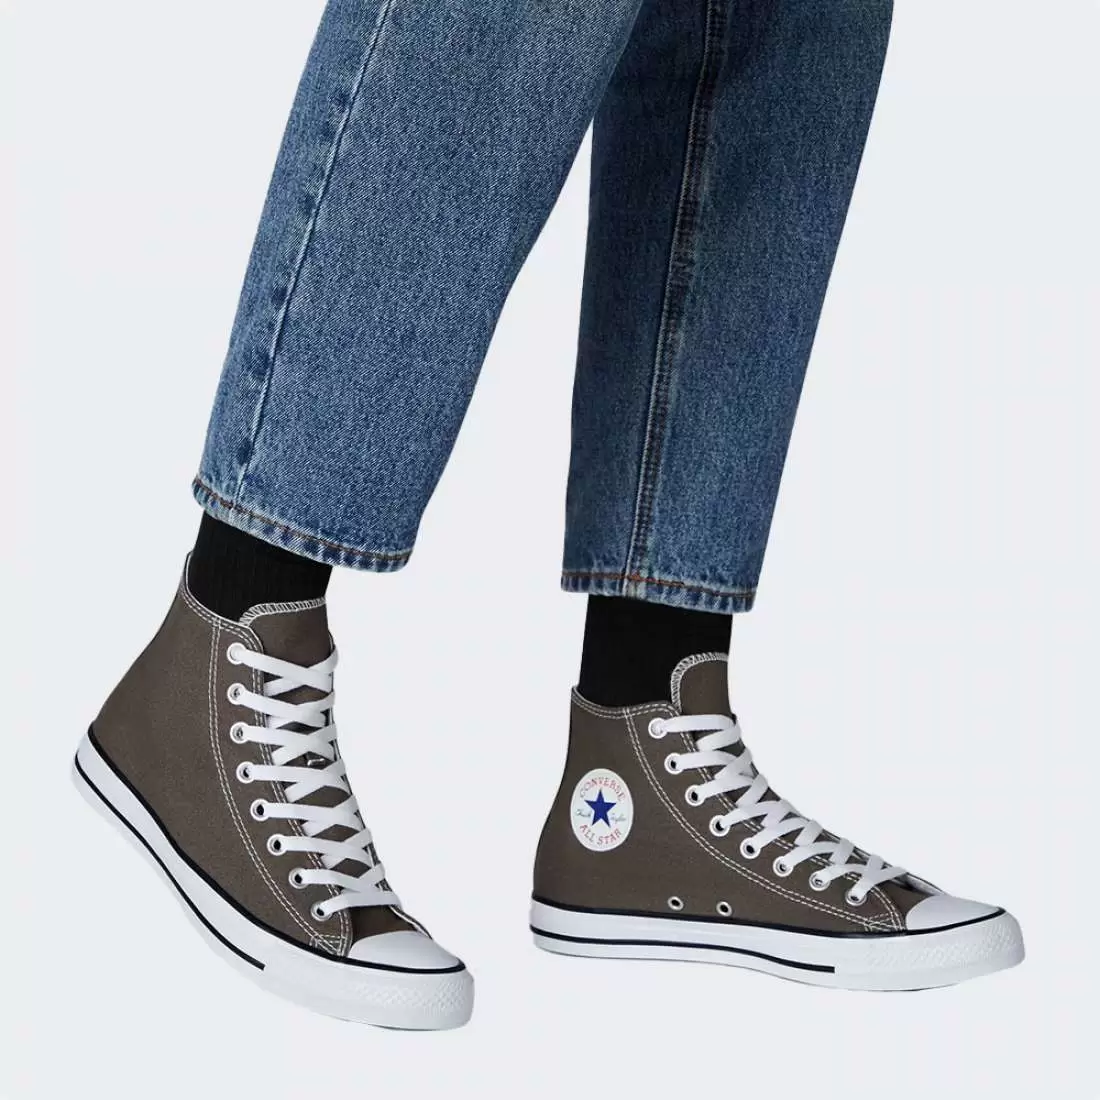 CONVERSE CHUCK TAYLOR ALL STAR HIGH TOP CHARCOAL